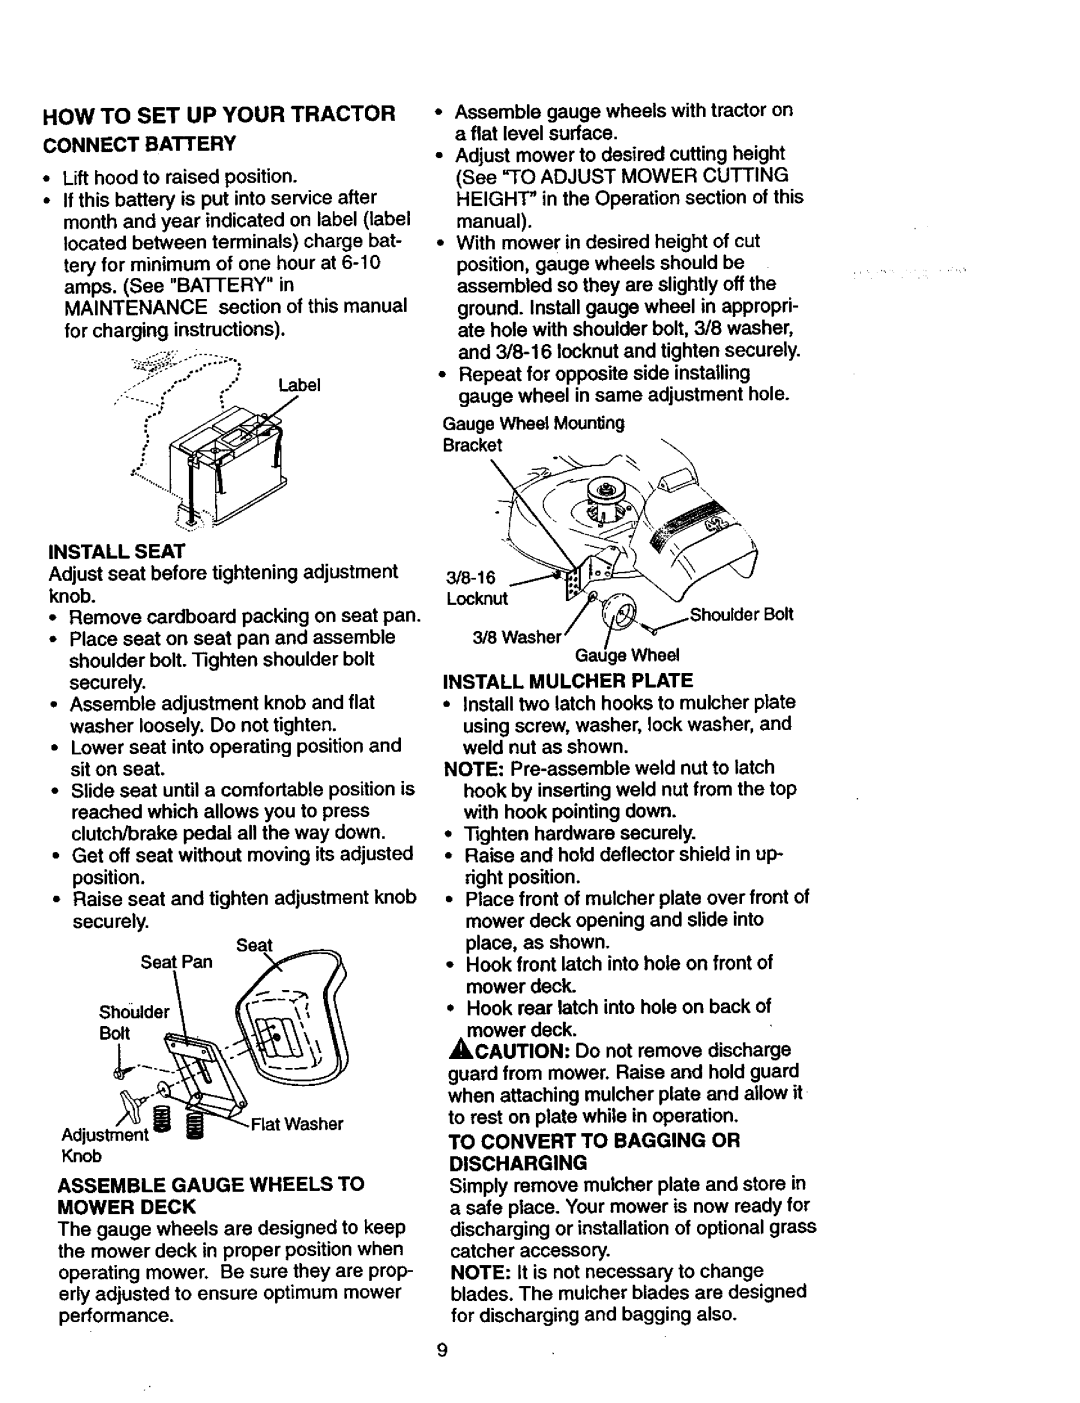 Craftsman 917.27077 manual How To Set Up Your Tractor Connect Battery, Bolt 